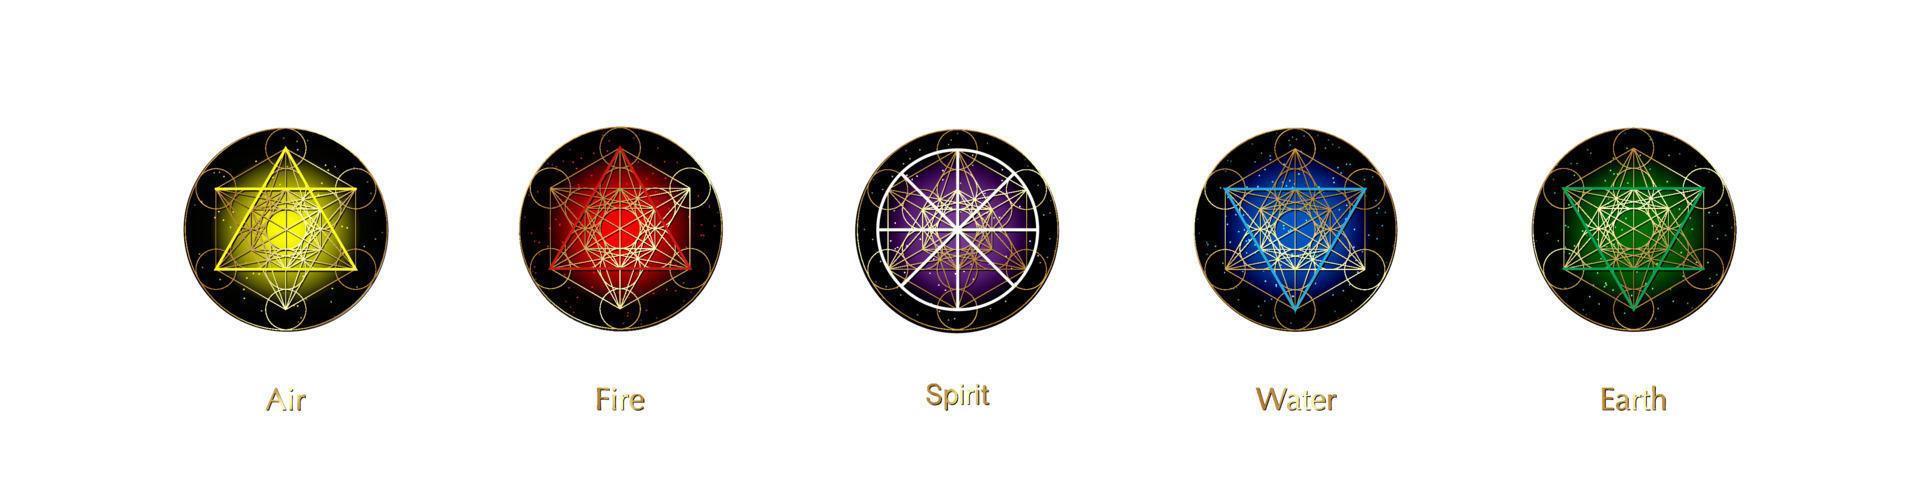 five elements icons and Magic Spirit symbol, Gold round symbols set template. Air, fire, water, earth four symbol. Pictograph Alchemy signs isolated on white background. Colorful vector elements